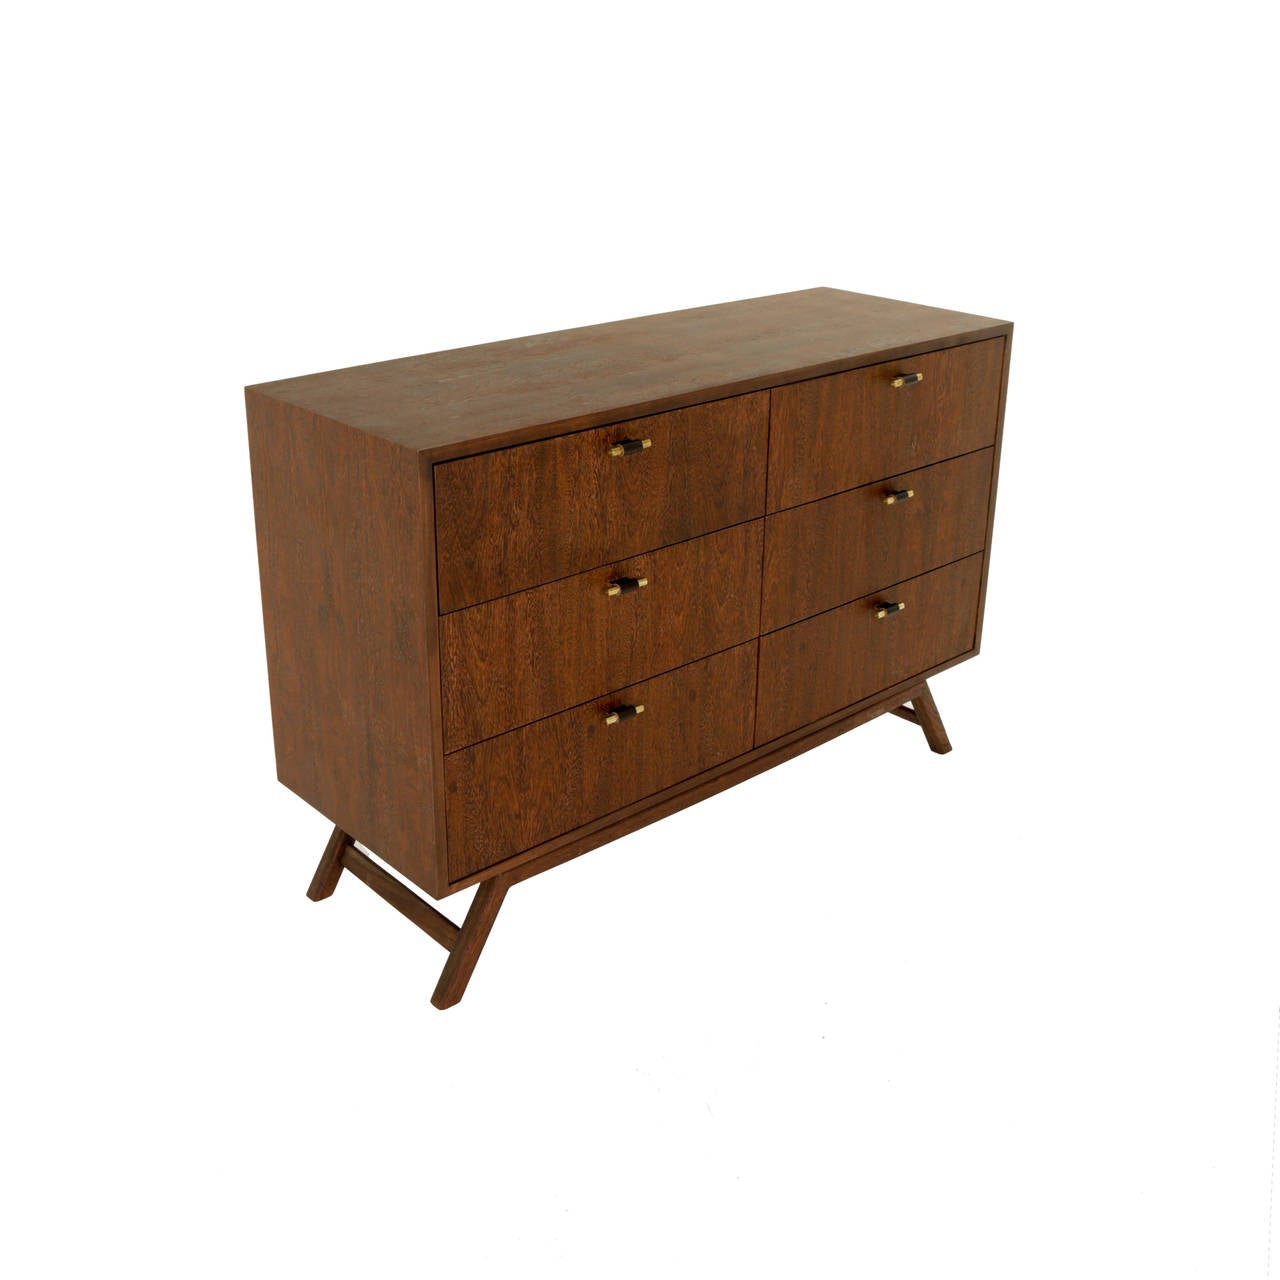 A custom limited dresser made from Brazilian Sucupira wood with a solid Brazilian Sucupira wood base that appears to be floating. The 6 drawers have black leather wrapped solid polished brass pulls. The finish is a lovely hand-rubbed oil